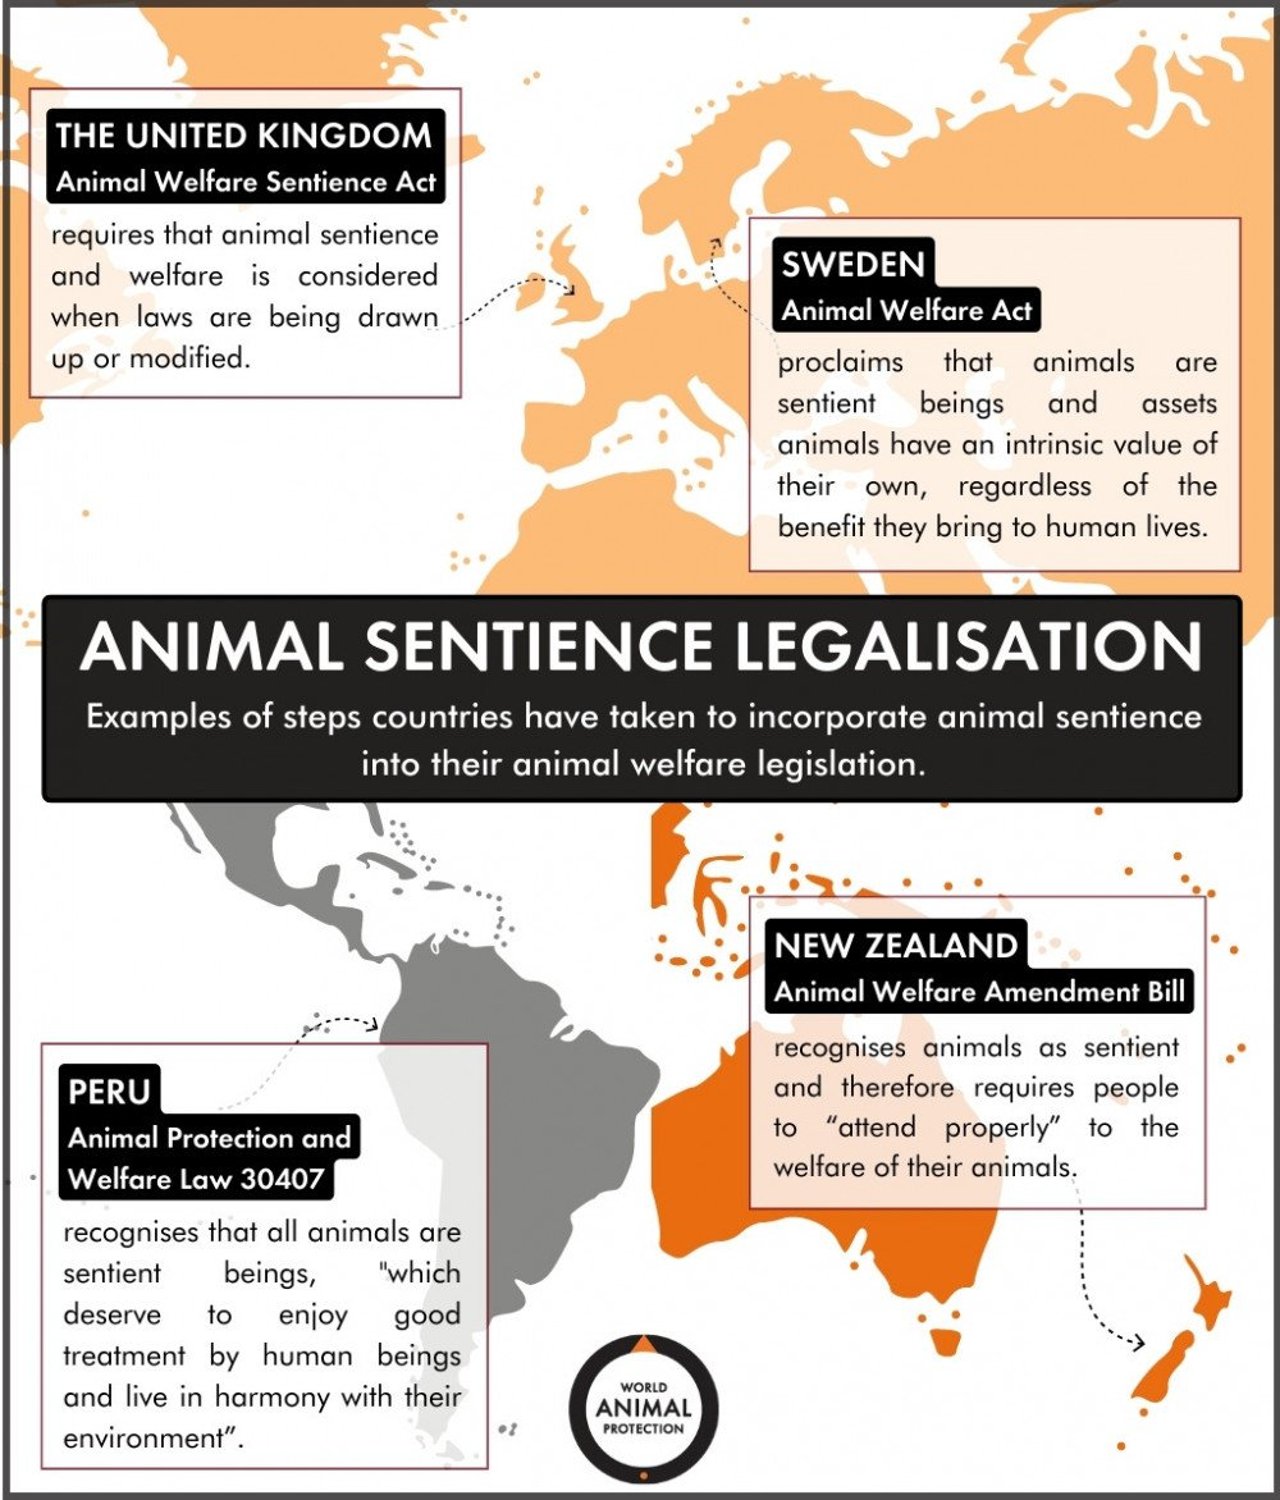 The summary of this articles information about international animal sentience legalisation displayed on a map